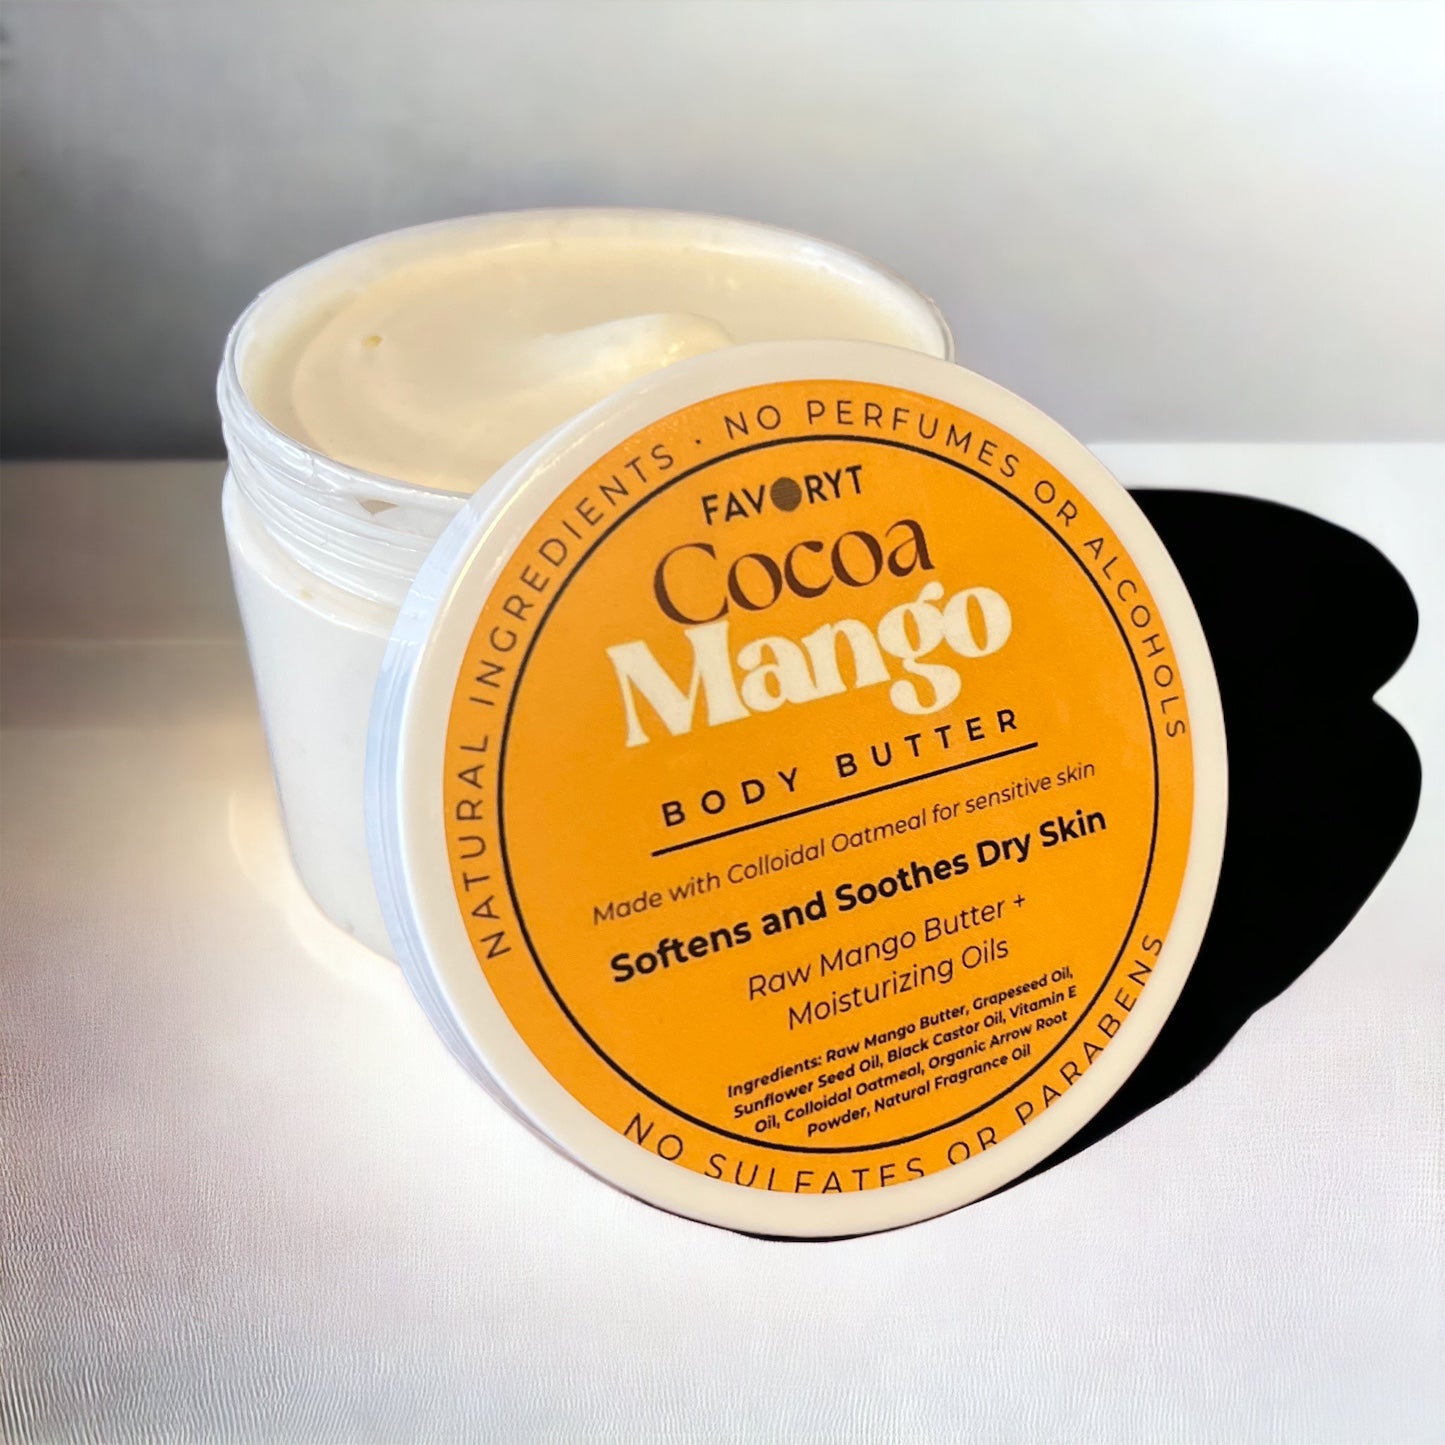 FAVORYT Cocoa Mango Body Butter - FAVORYT BRAND